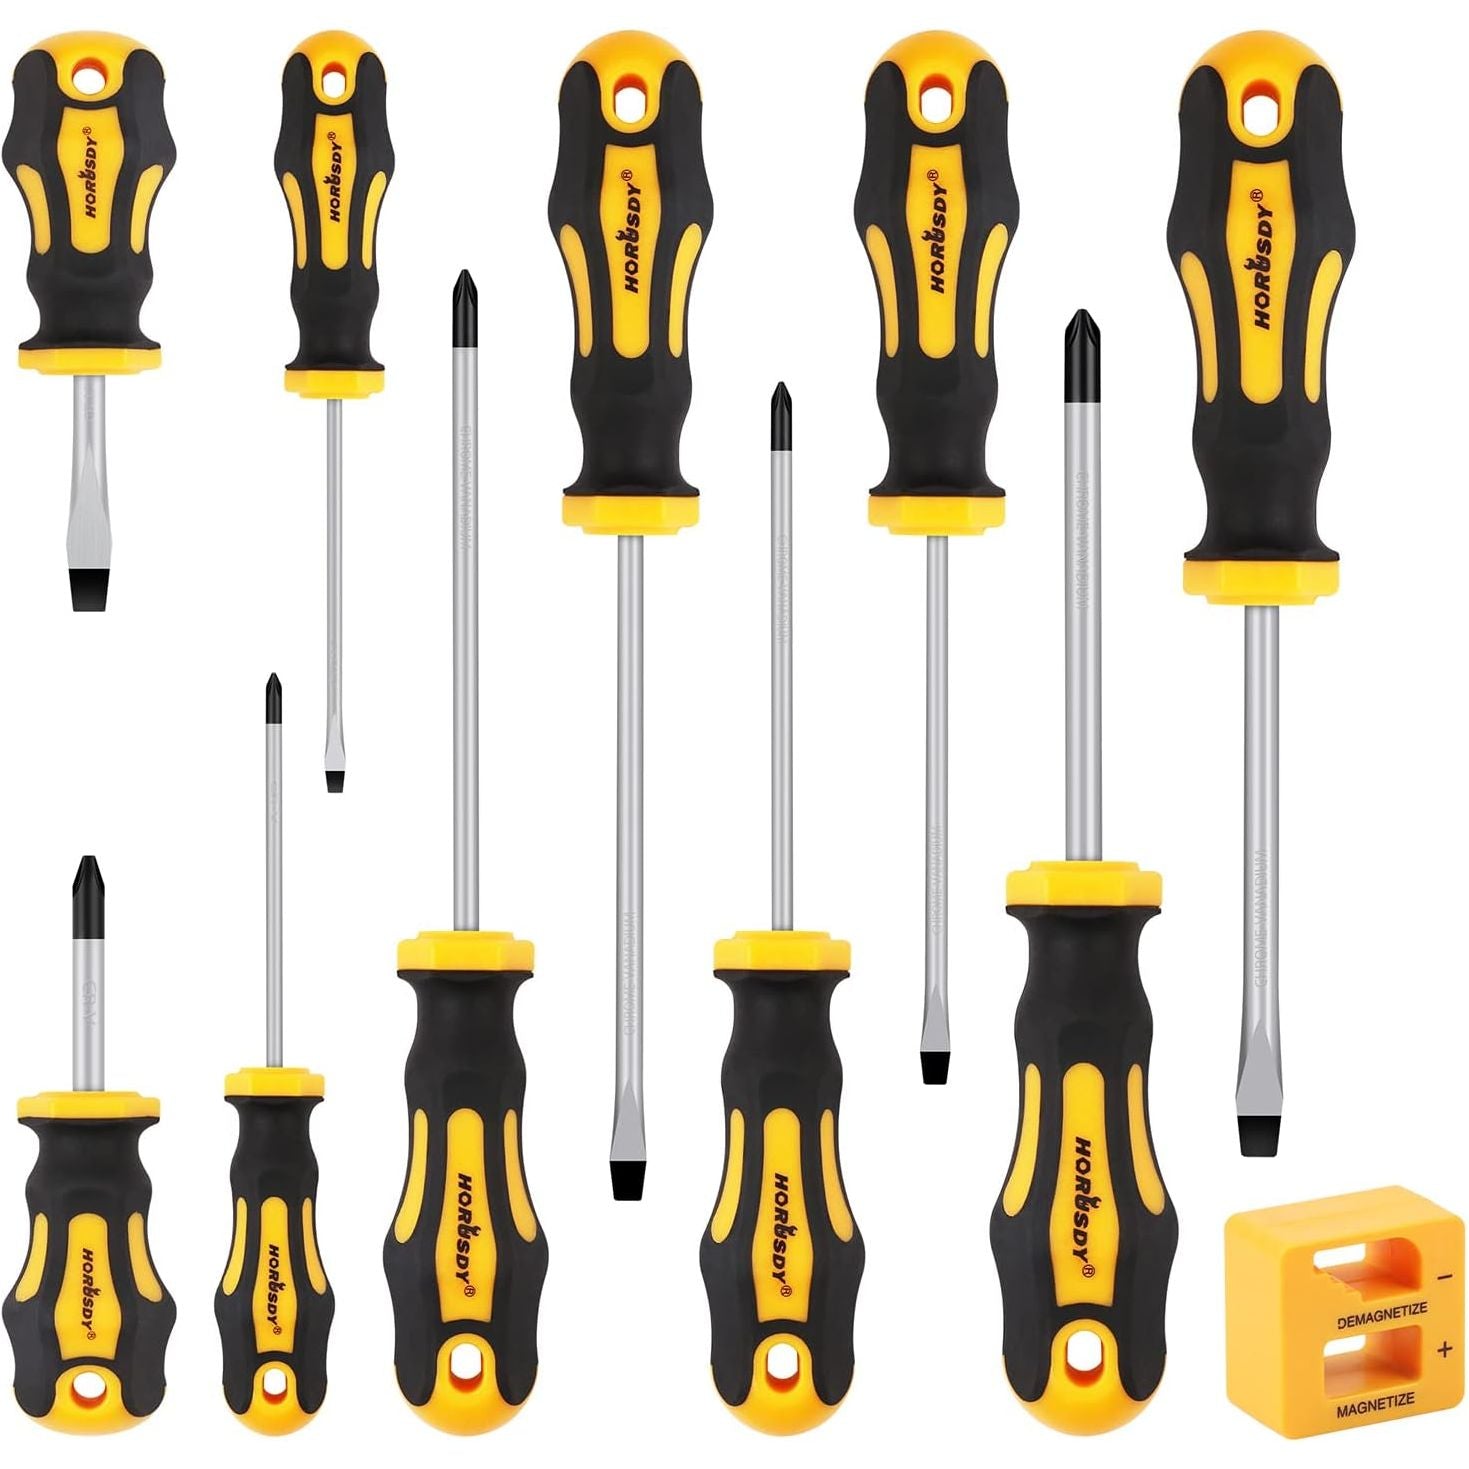 11 Piece Heavy Duty Magnetic Screwdriver Set with Magnetister/Demagnetiser - South East Clearance Centre